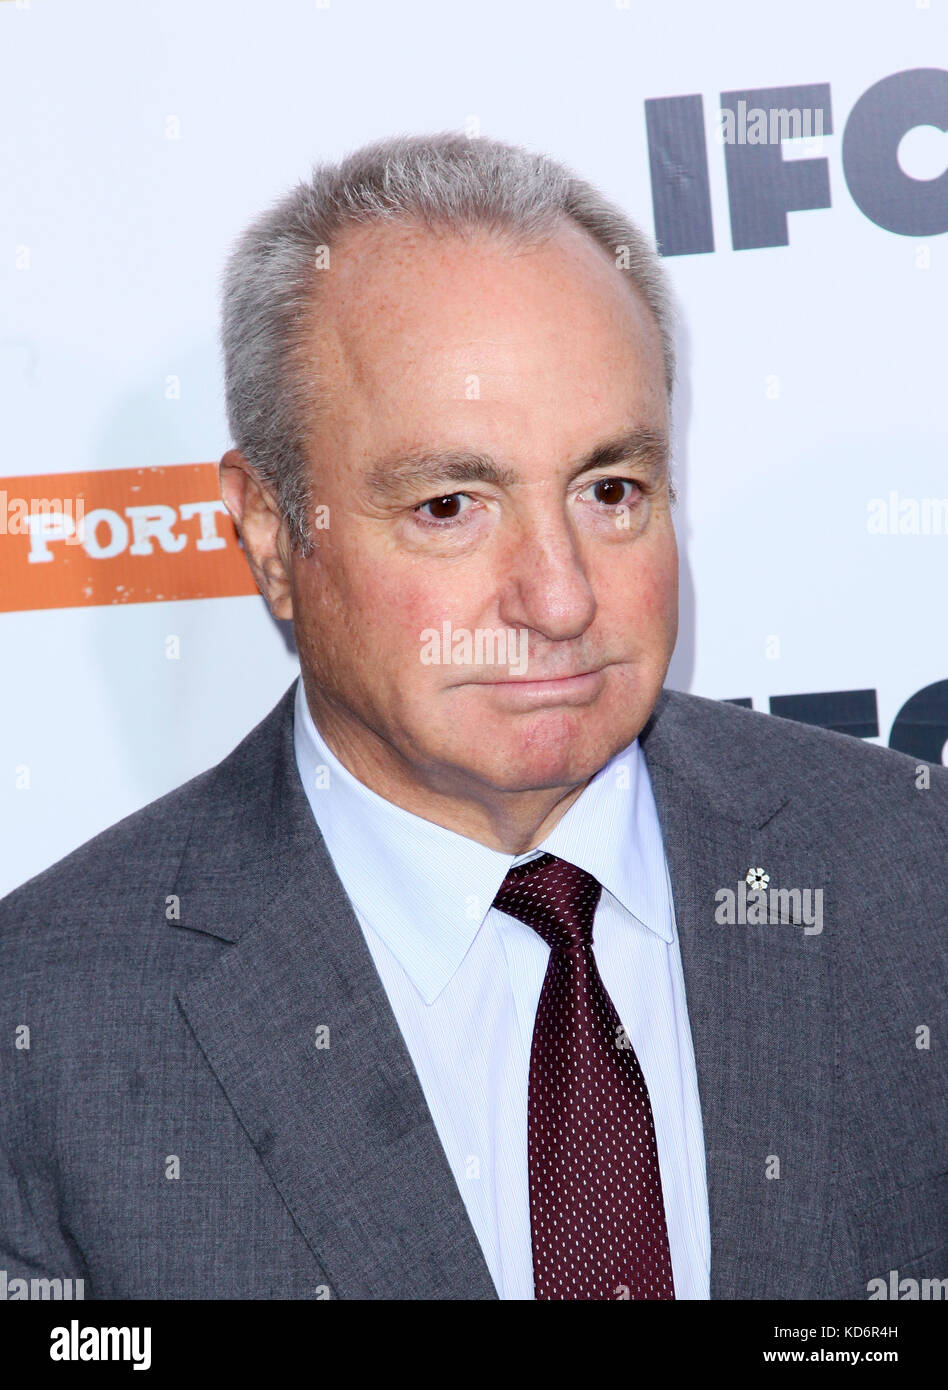 Lorne Michaels pictured at the premiere of IFCs' comedy series ' Portlandia ' at The Edison Ballroom in New York City, January 19, 2011 © Martin Roe / MediaPunch Inc Stock Photo